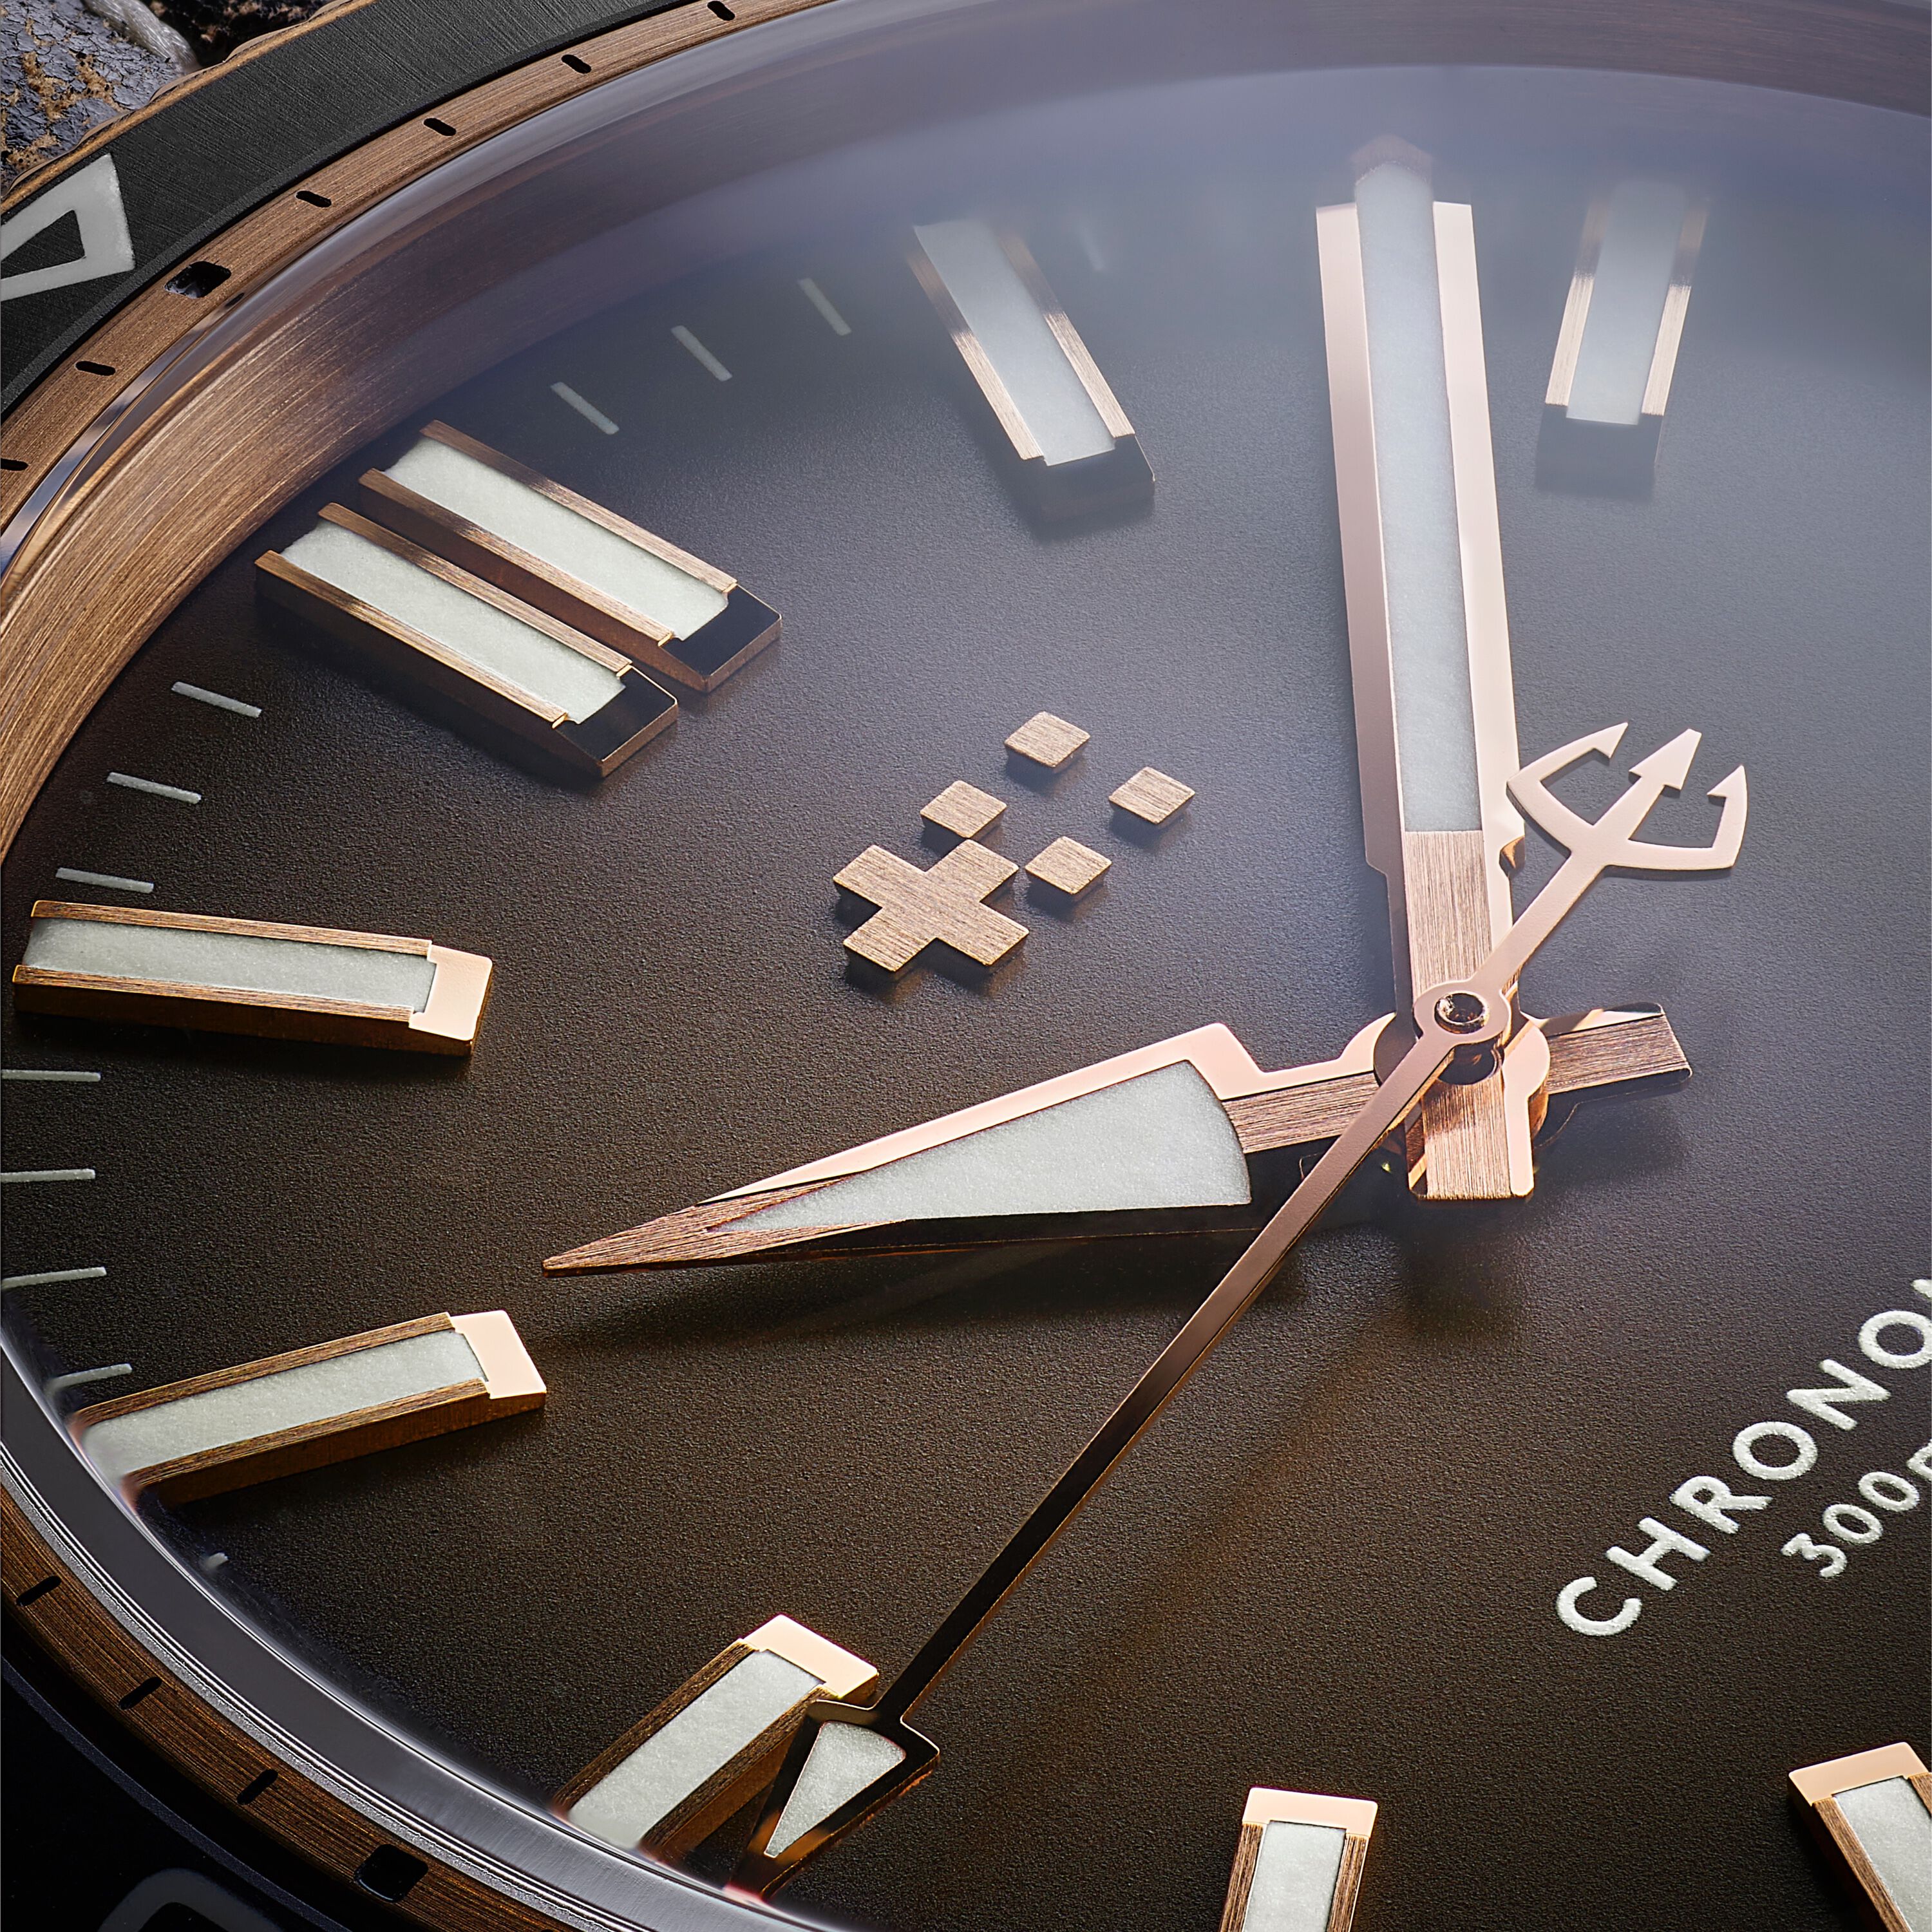 7 of the best bronze watches | BUYING GUIDE